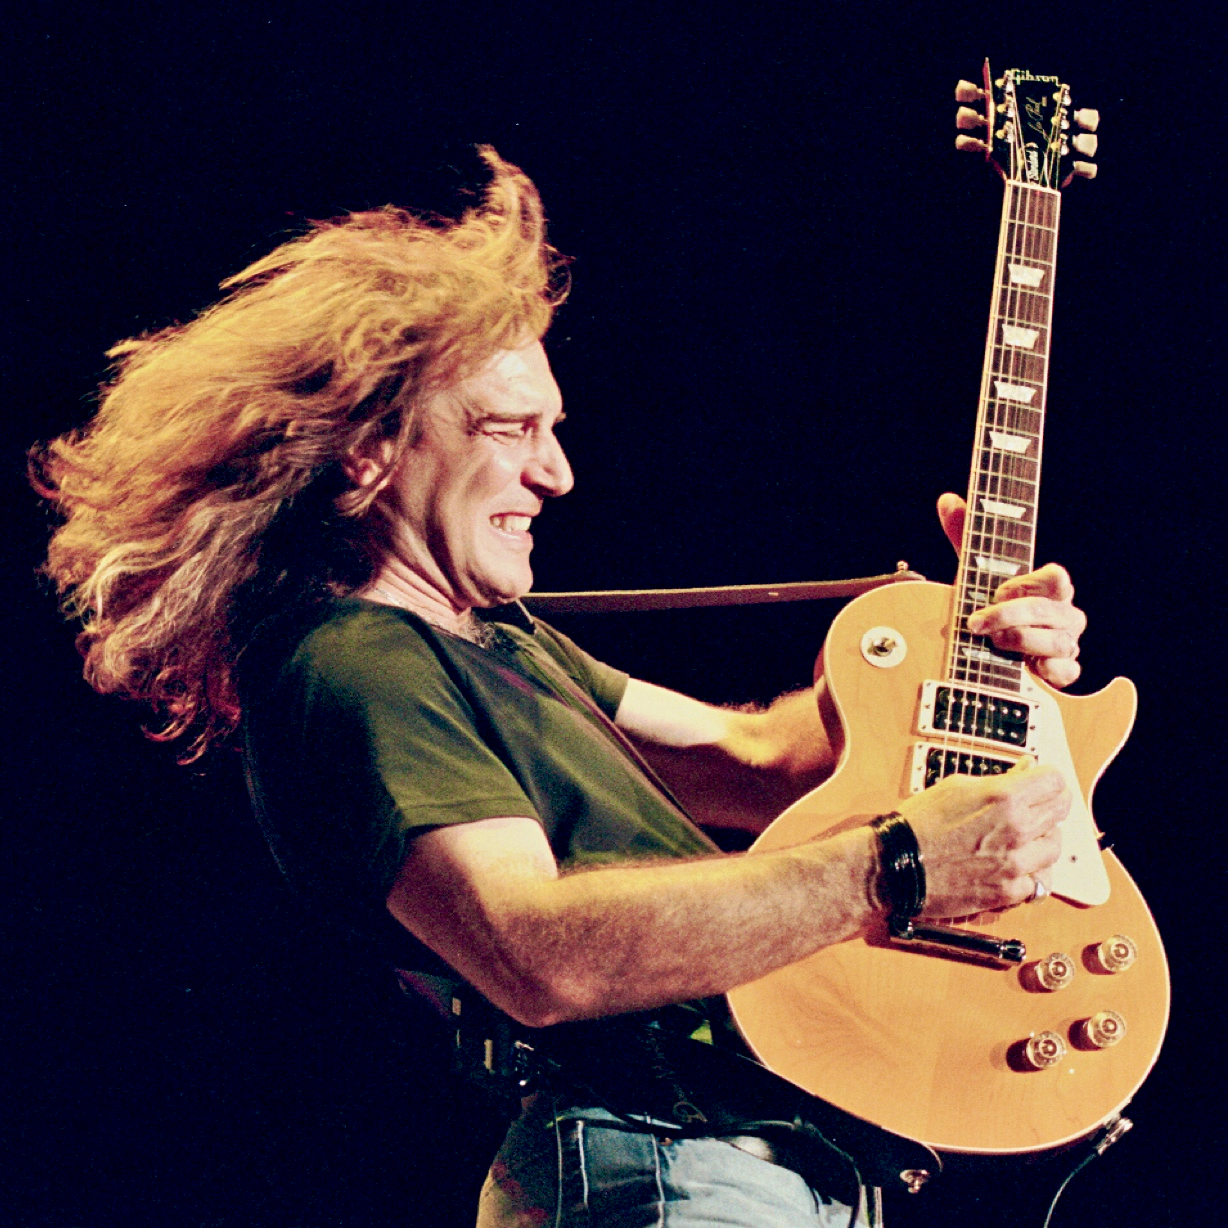 Dave Amato - Guitarist from REO Speedwagon from August, 1996